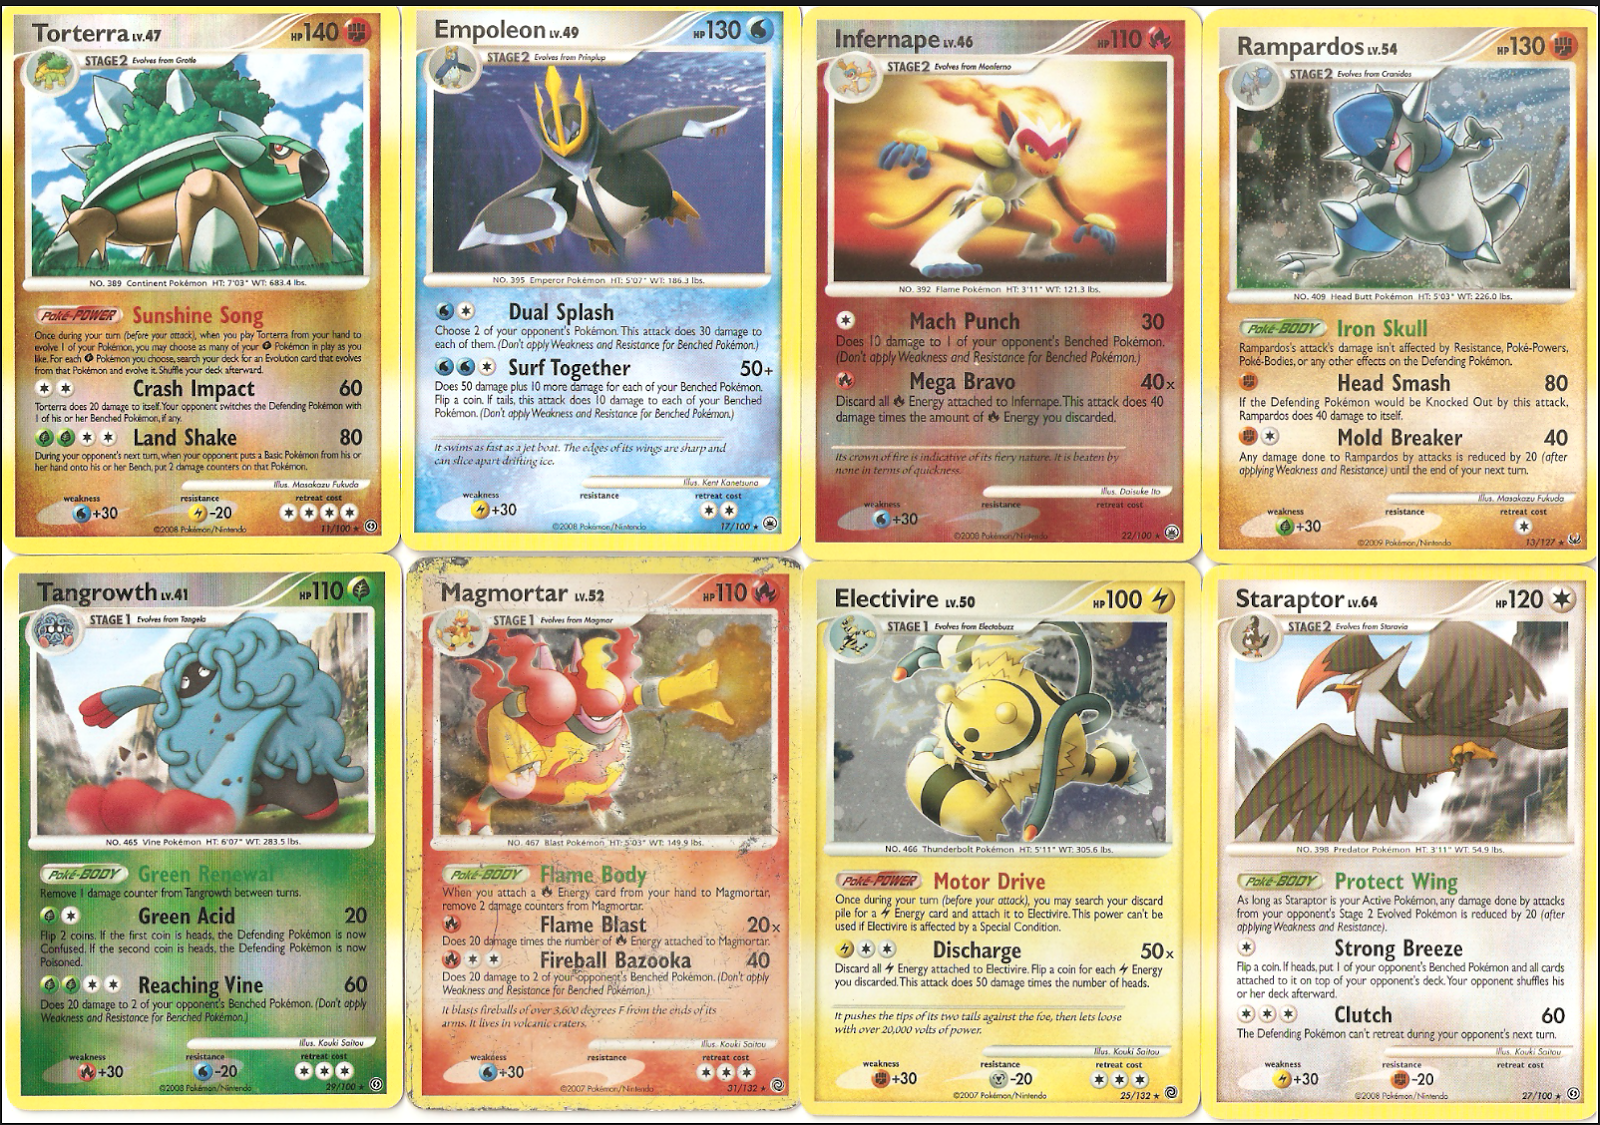 I looked at successful card collecting games such as Pokémon, I found that ...